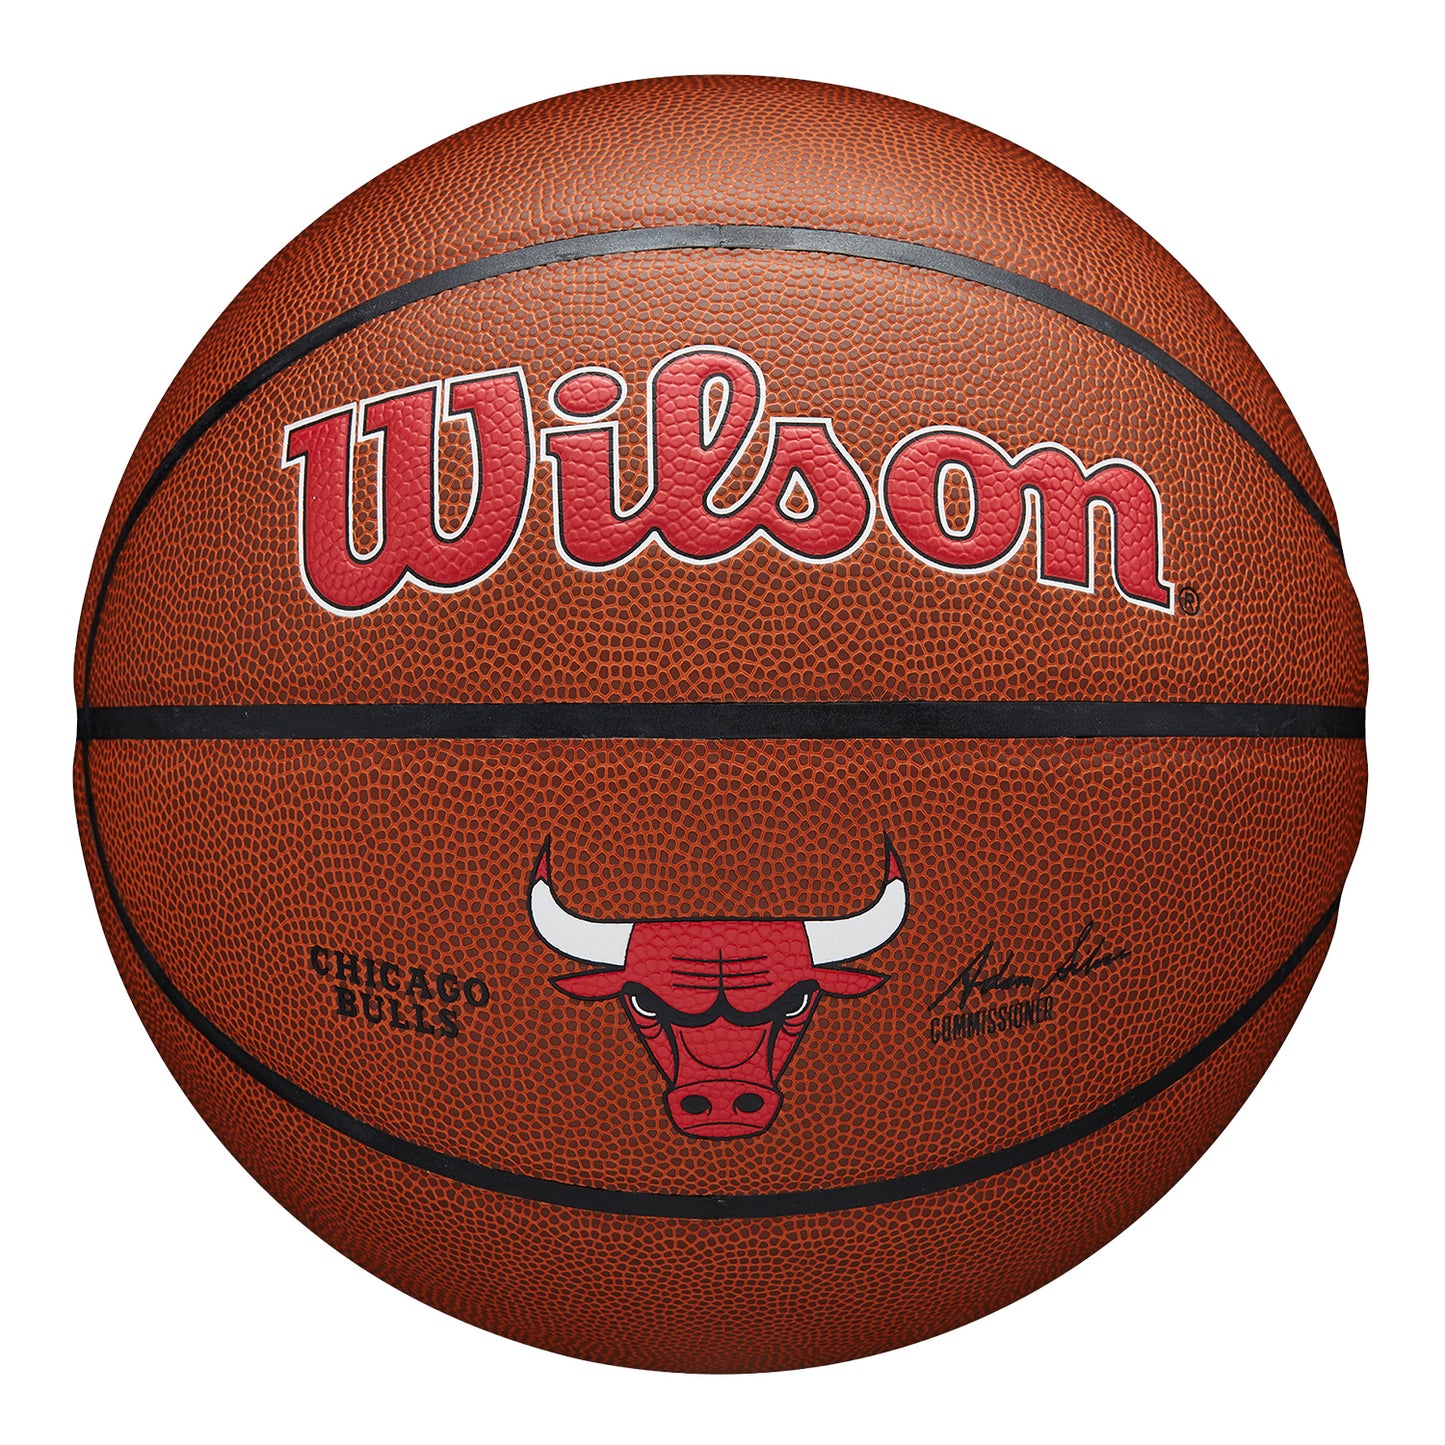 Chicago Bulls Team Alliance Basketball - brown, front view